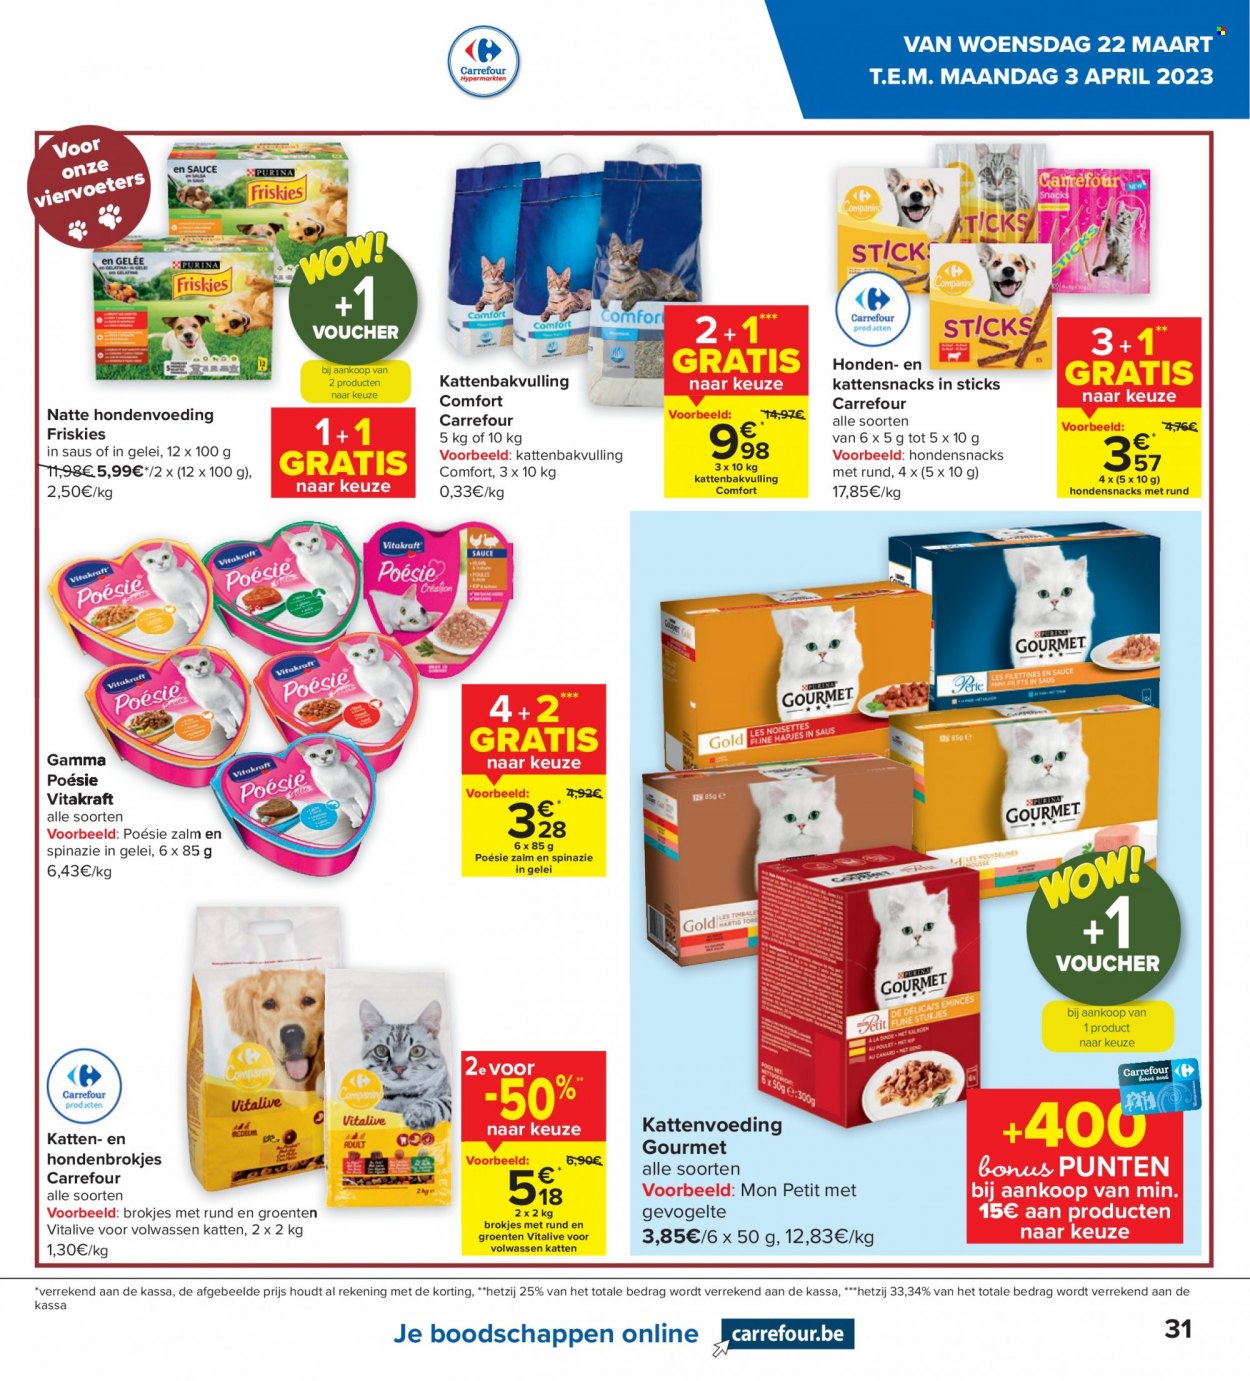 Catalogue Carrefour hypermarkt - 22.3.2023 - 3.4.2023. Page 11.